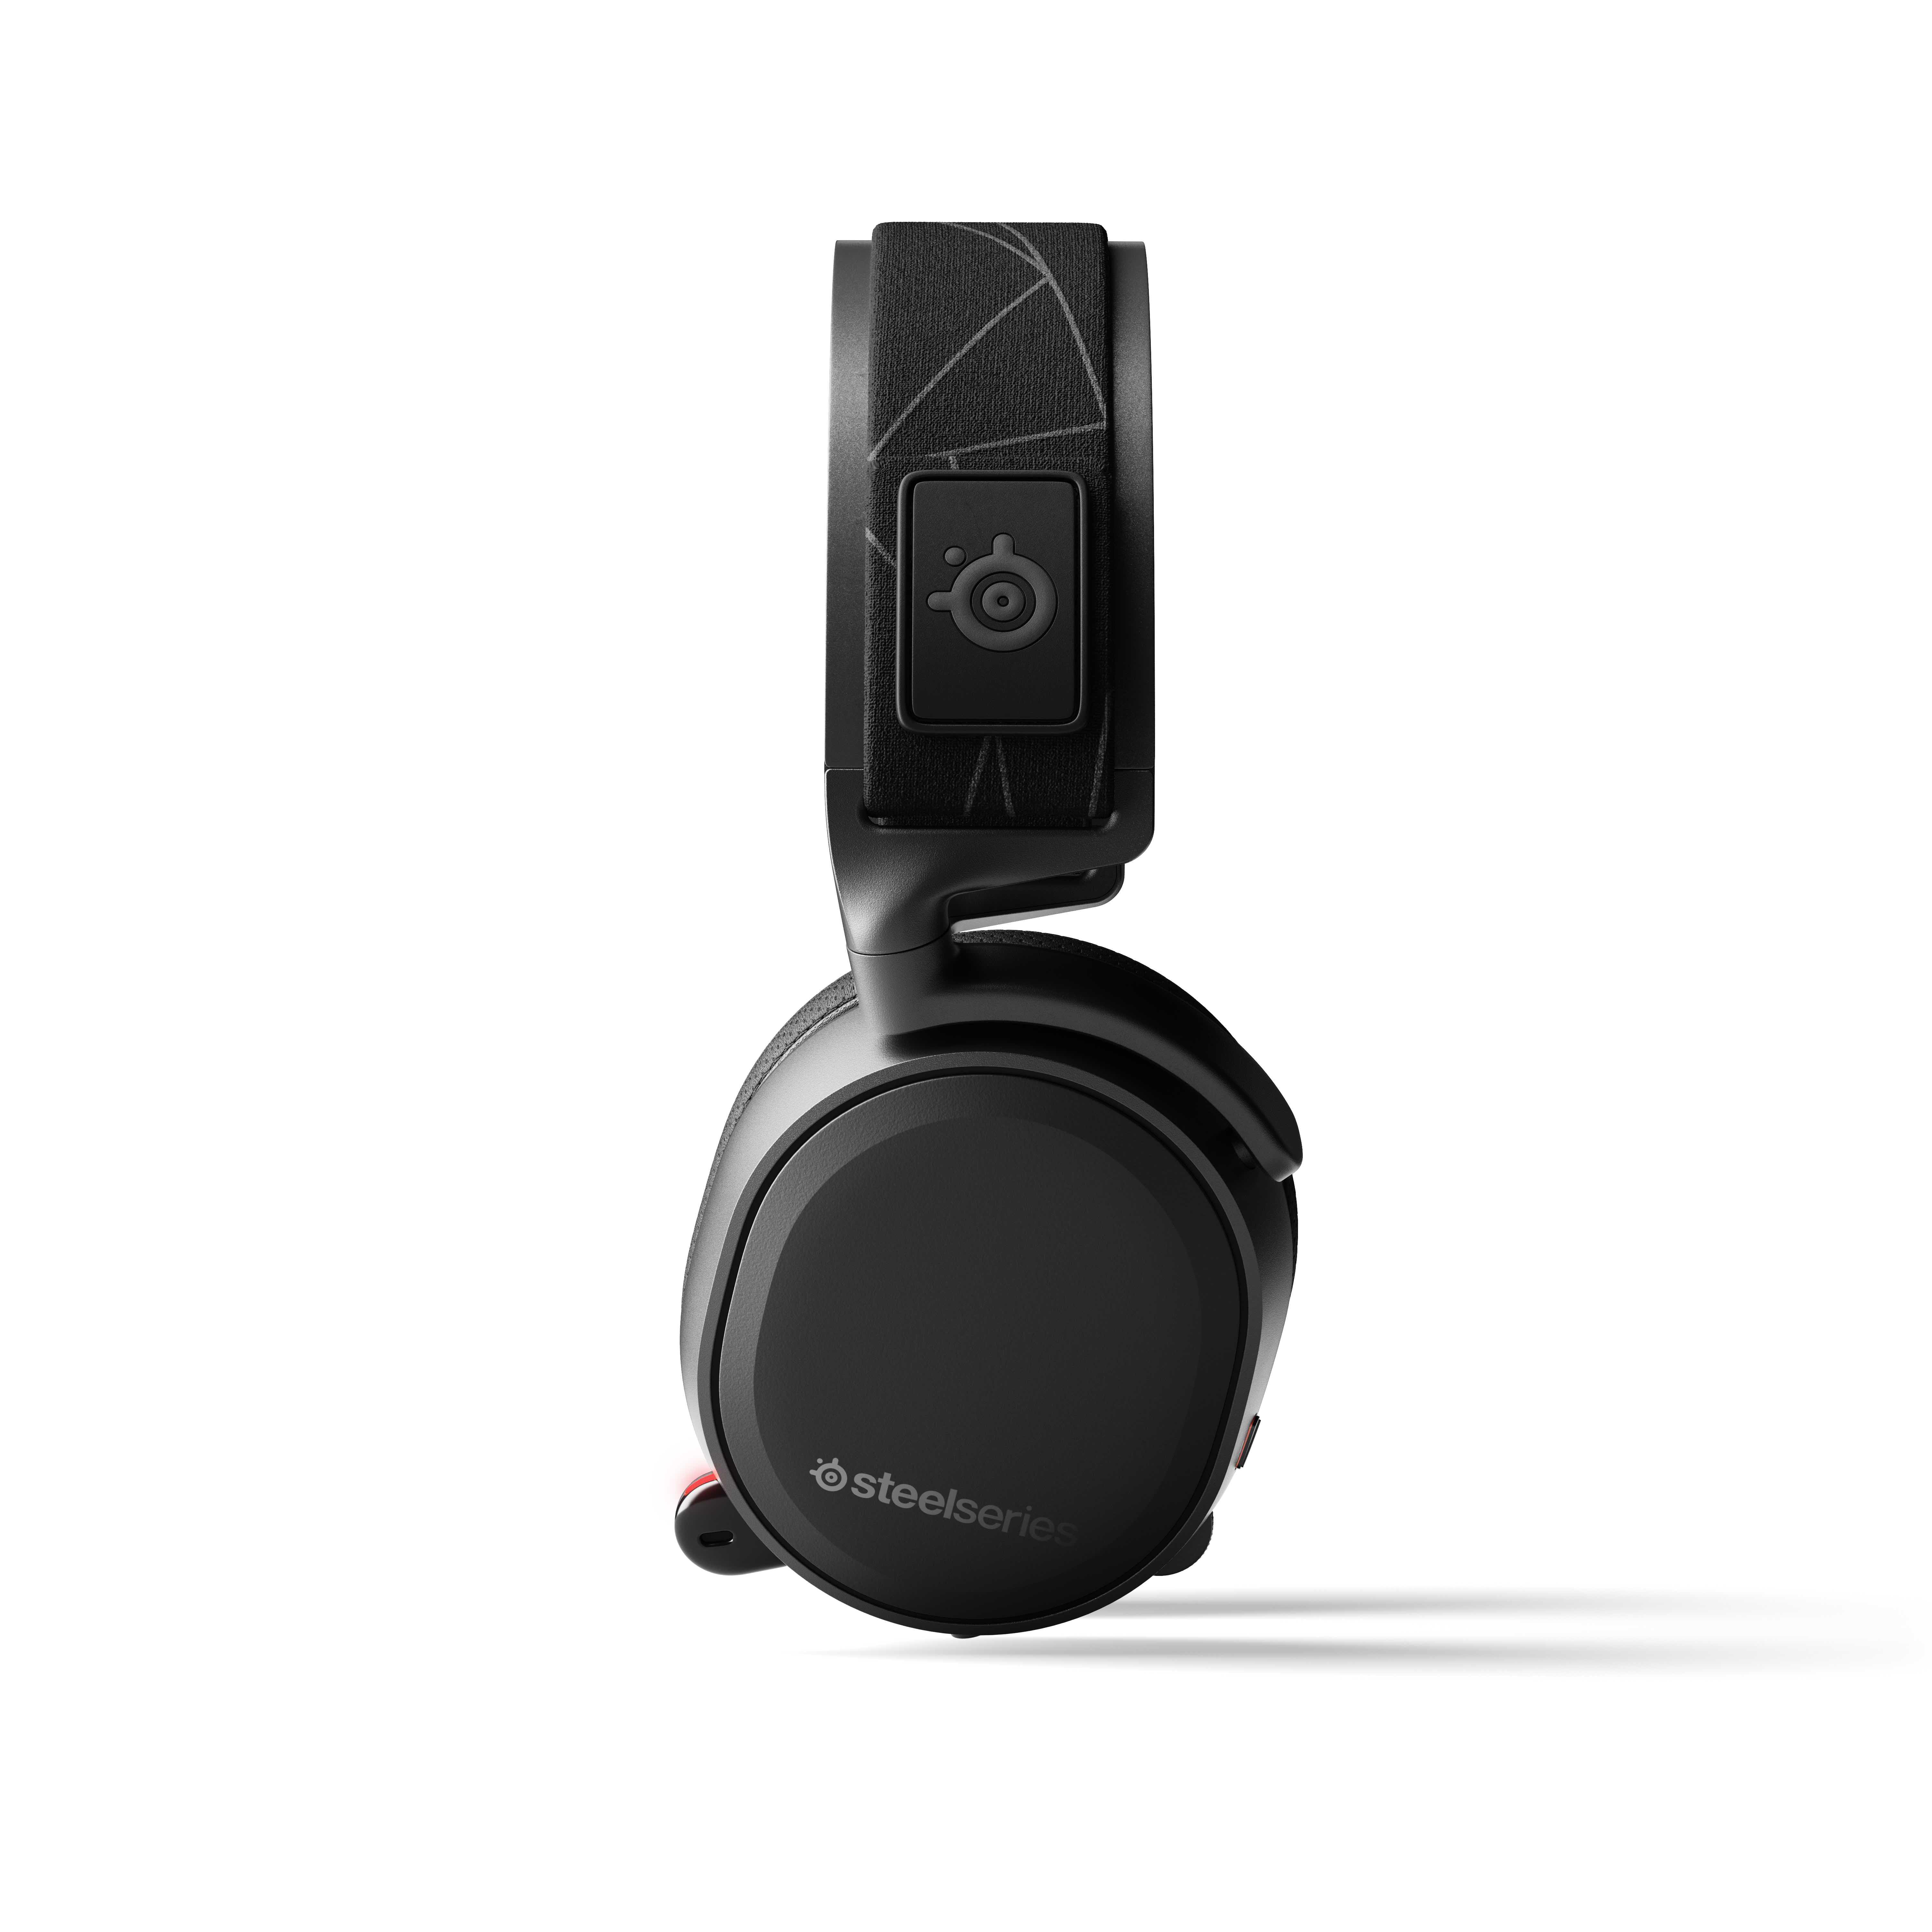  SteelSeries Arctis 7 - Lossless Wireless Gaming Headset with  DTS Headphone: X v2.0 Surround - for PC and PlayStation 4 - Black : Todo lo  demás